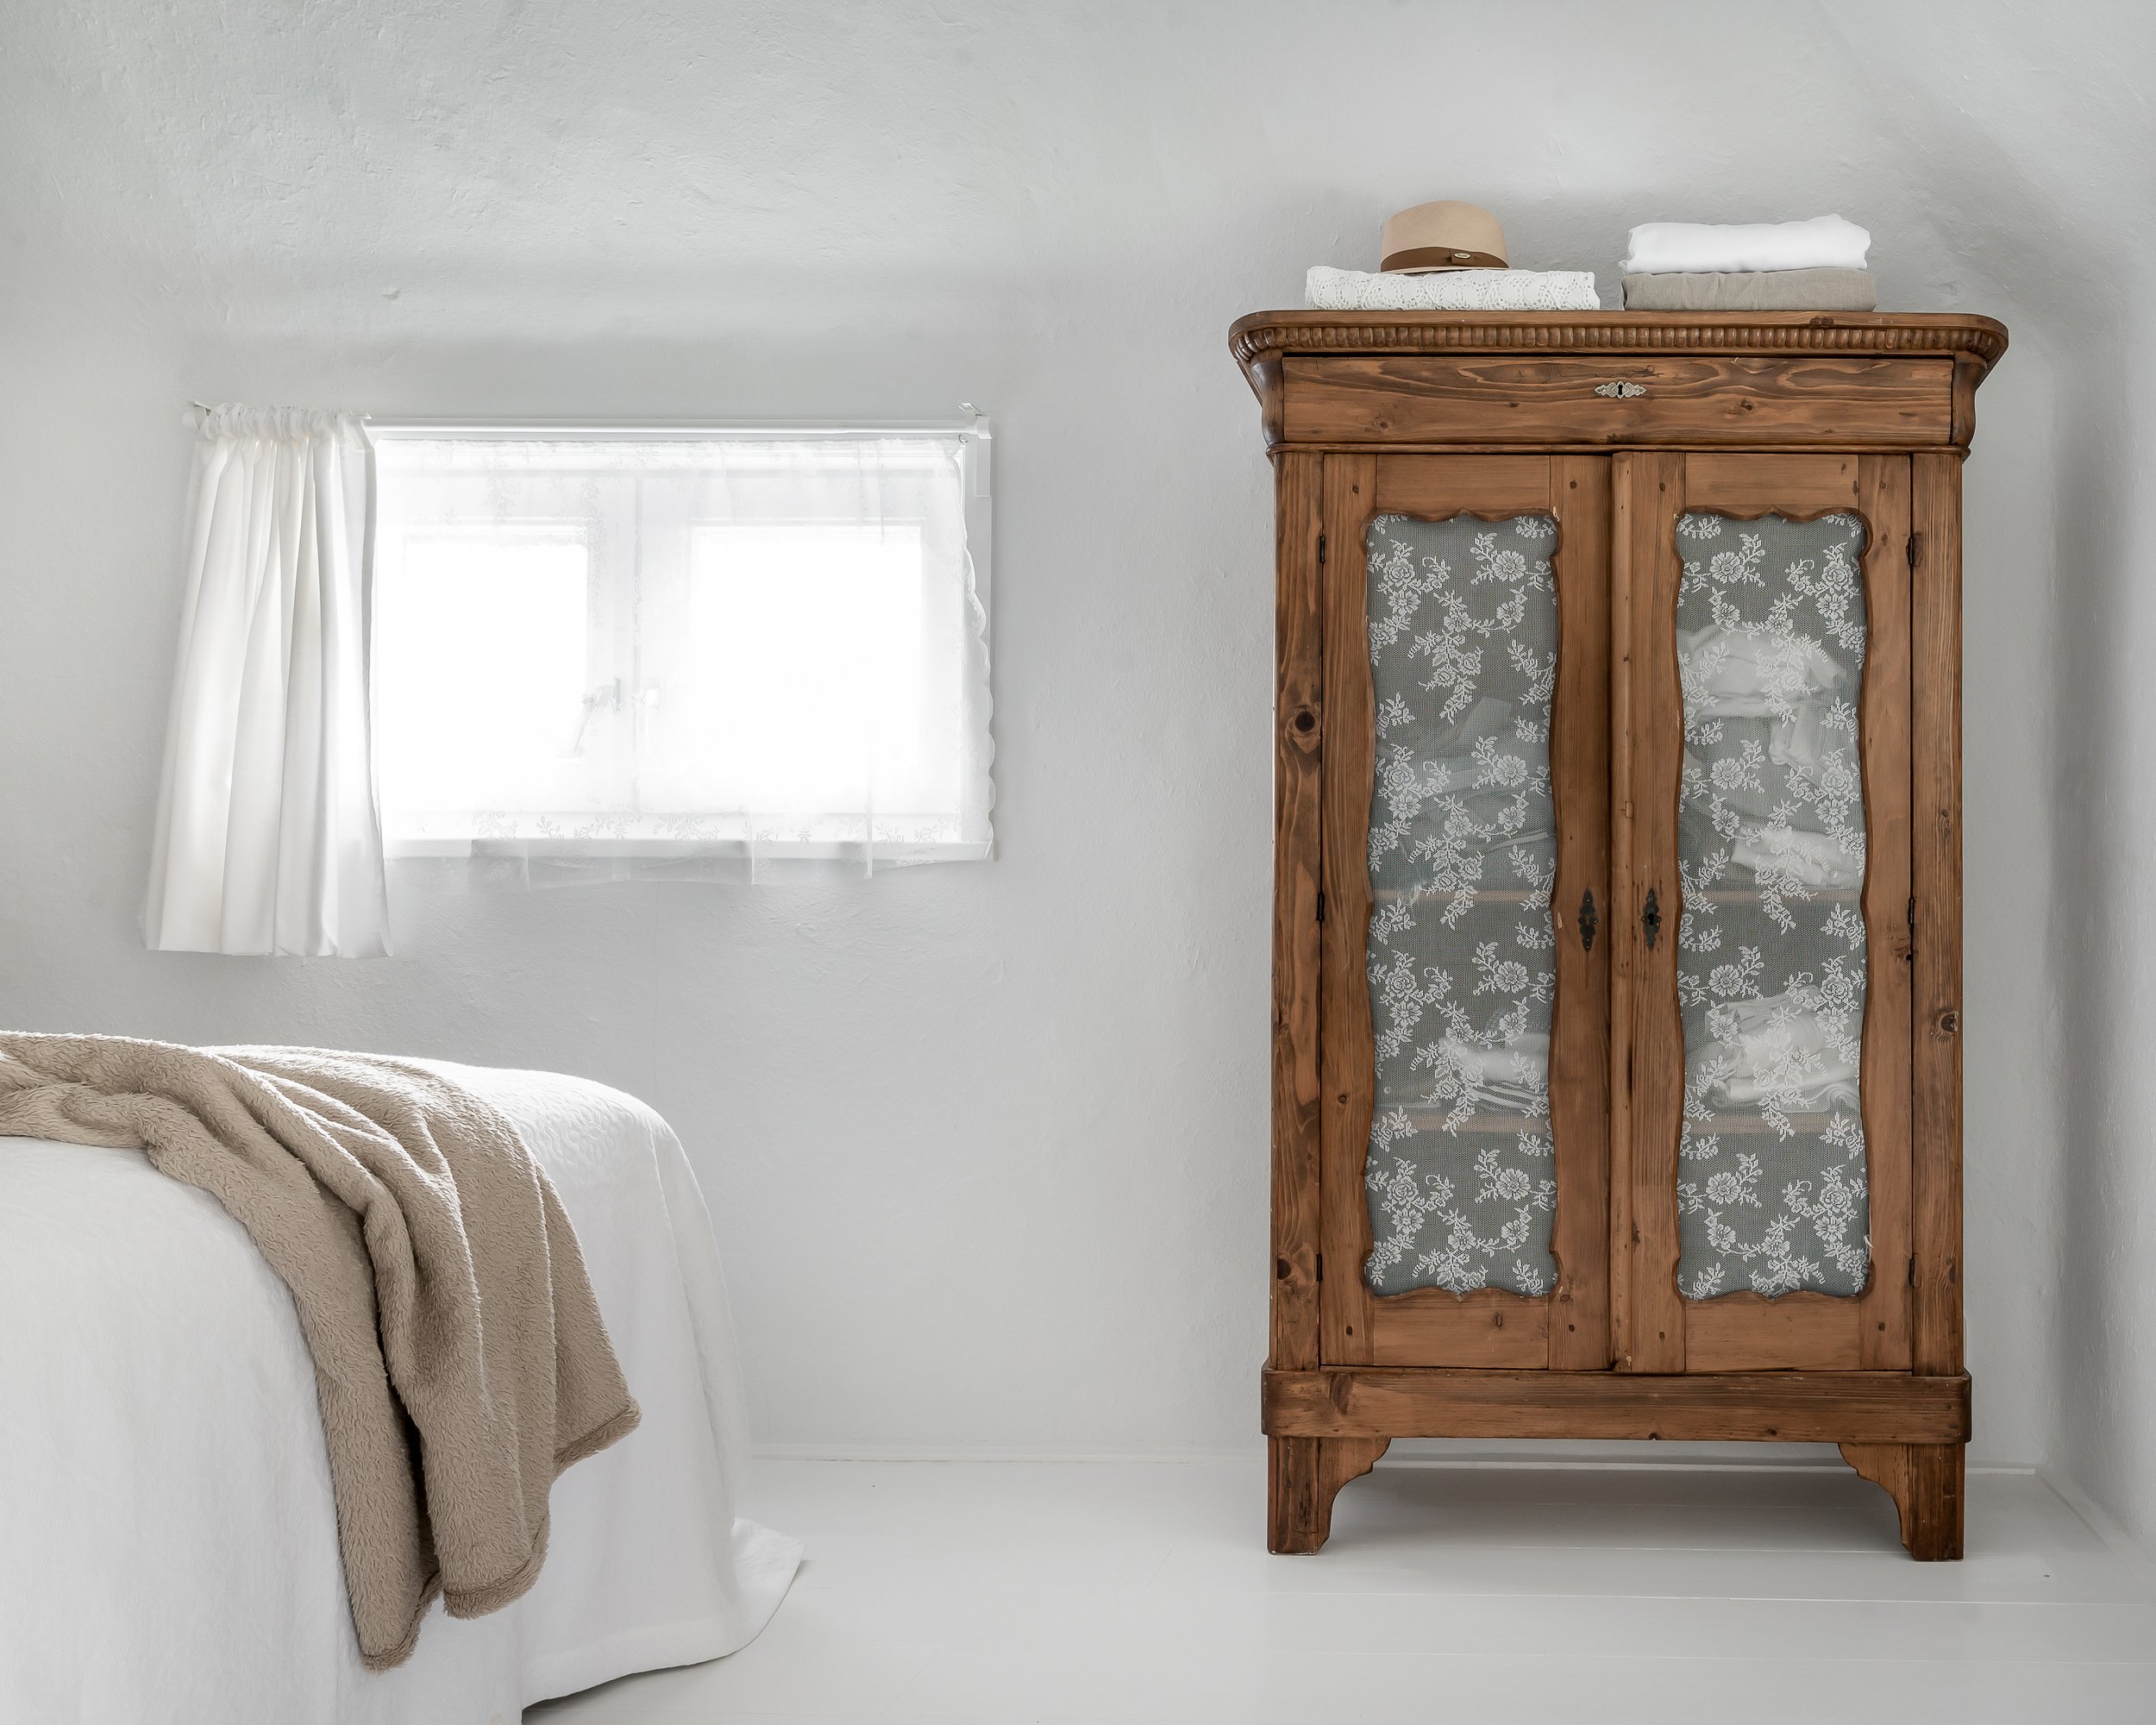 Wooden antique wardrobe in a white bedroom